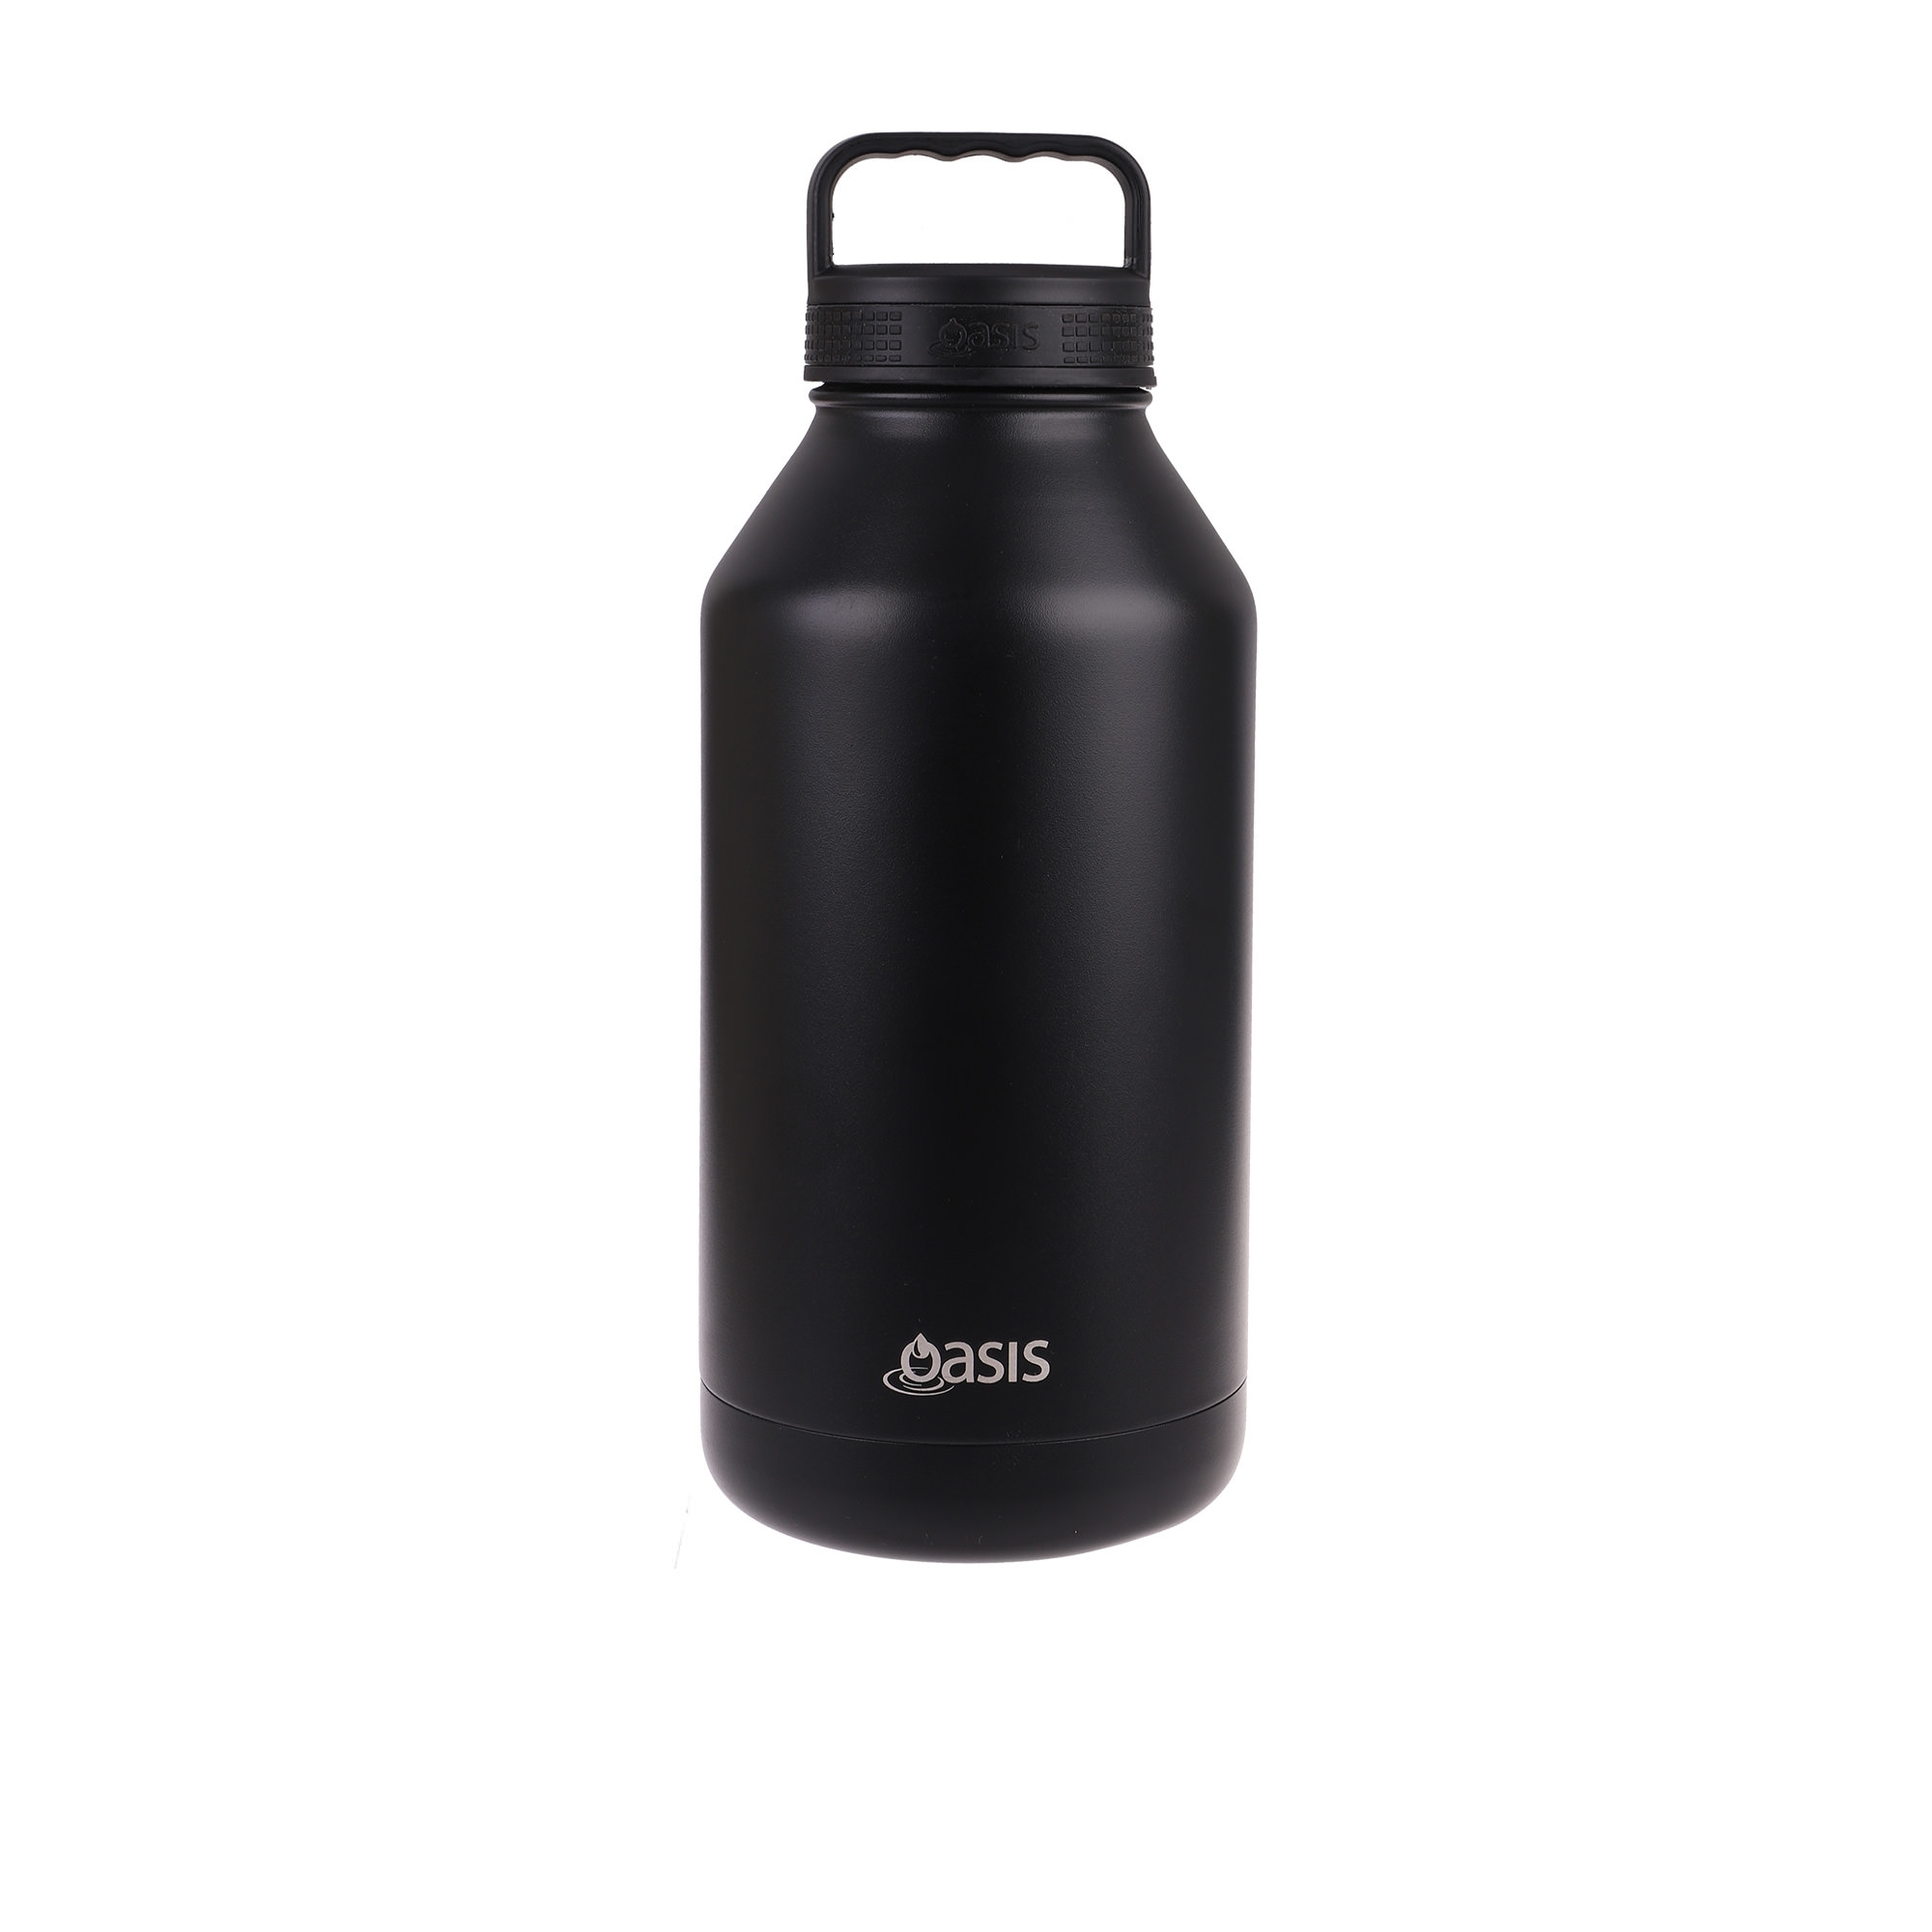 Oasis Double Wall Insulated Titan Drink Bottle 1.9L Black Image 1